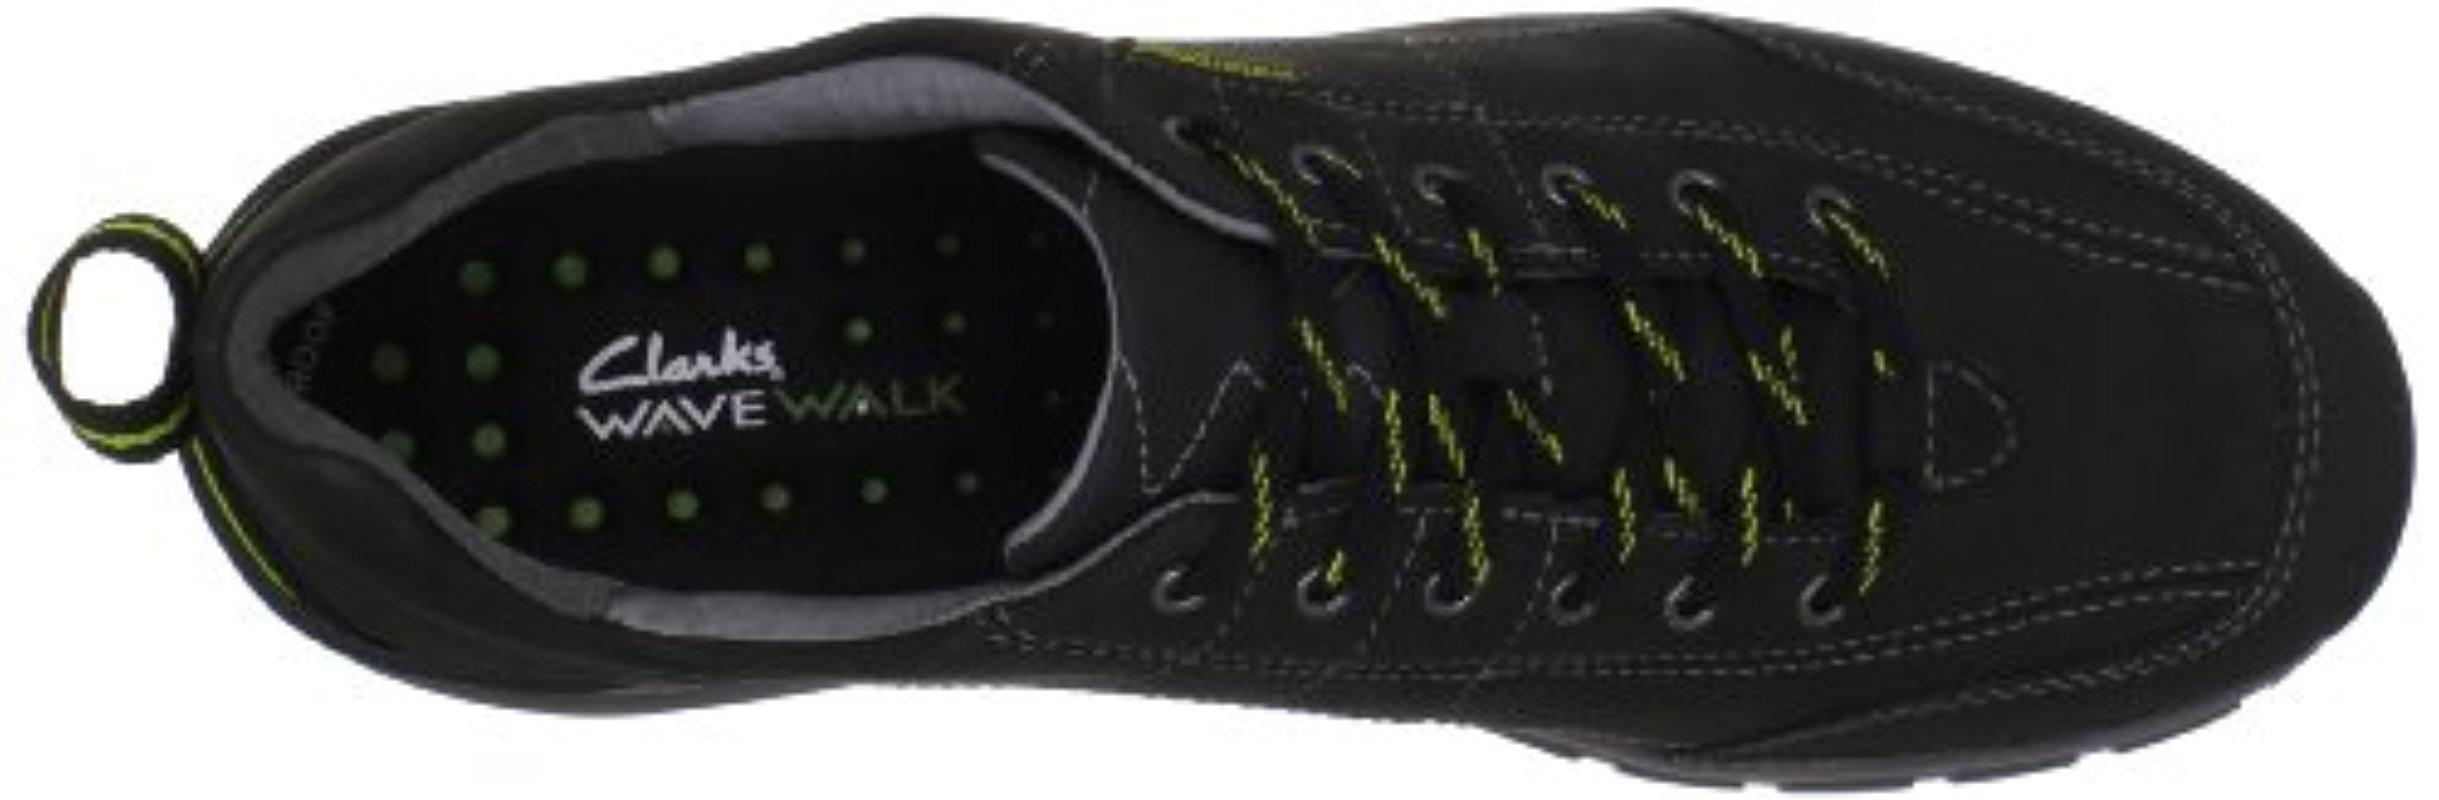 applause meaning turn around Clarks Leather Wave Trek Sneaker in Black Leather (Black) | Lyst